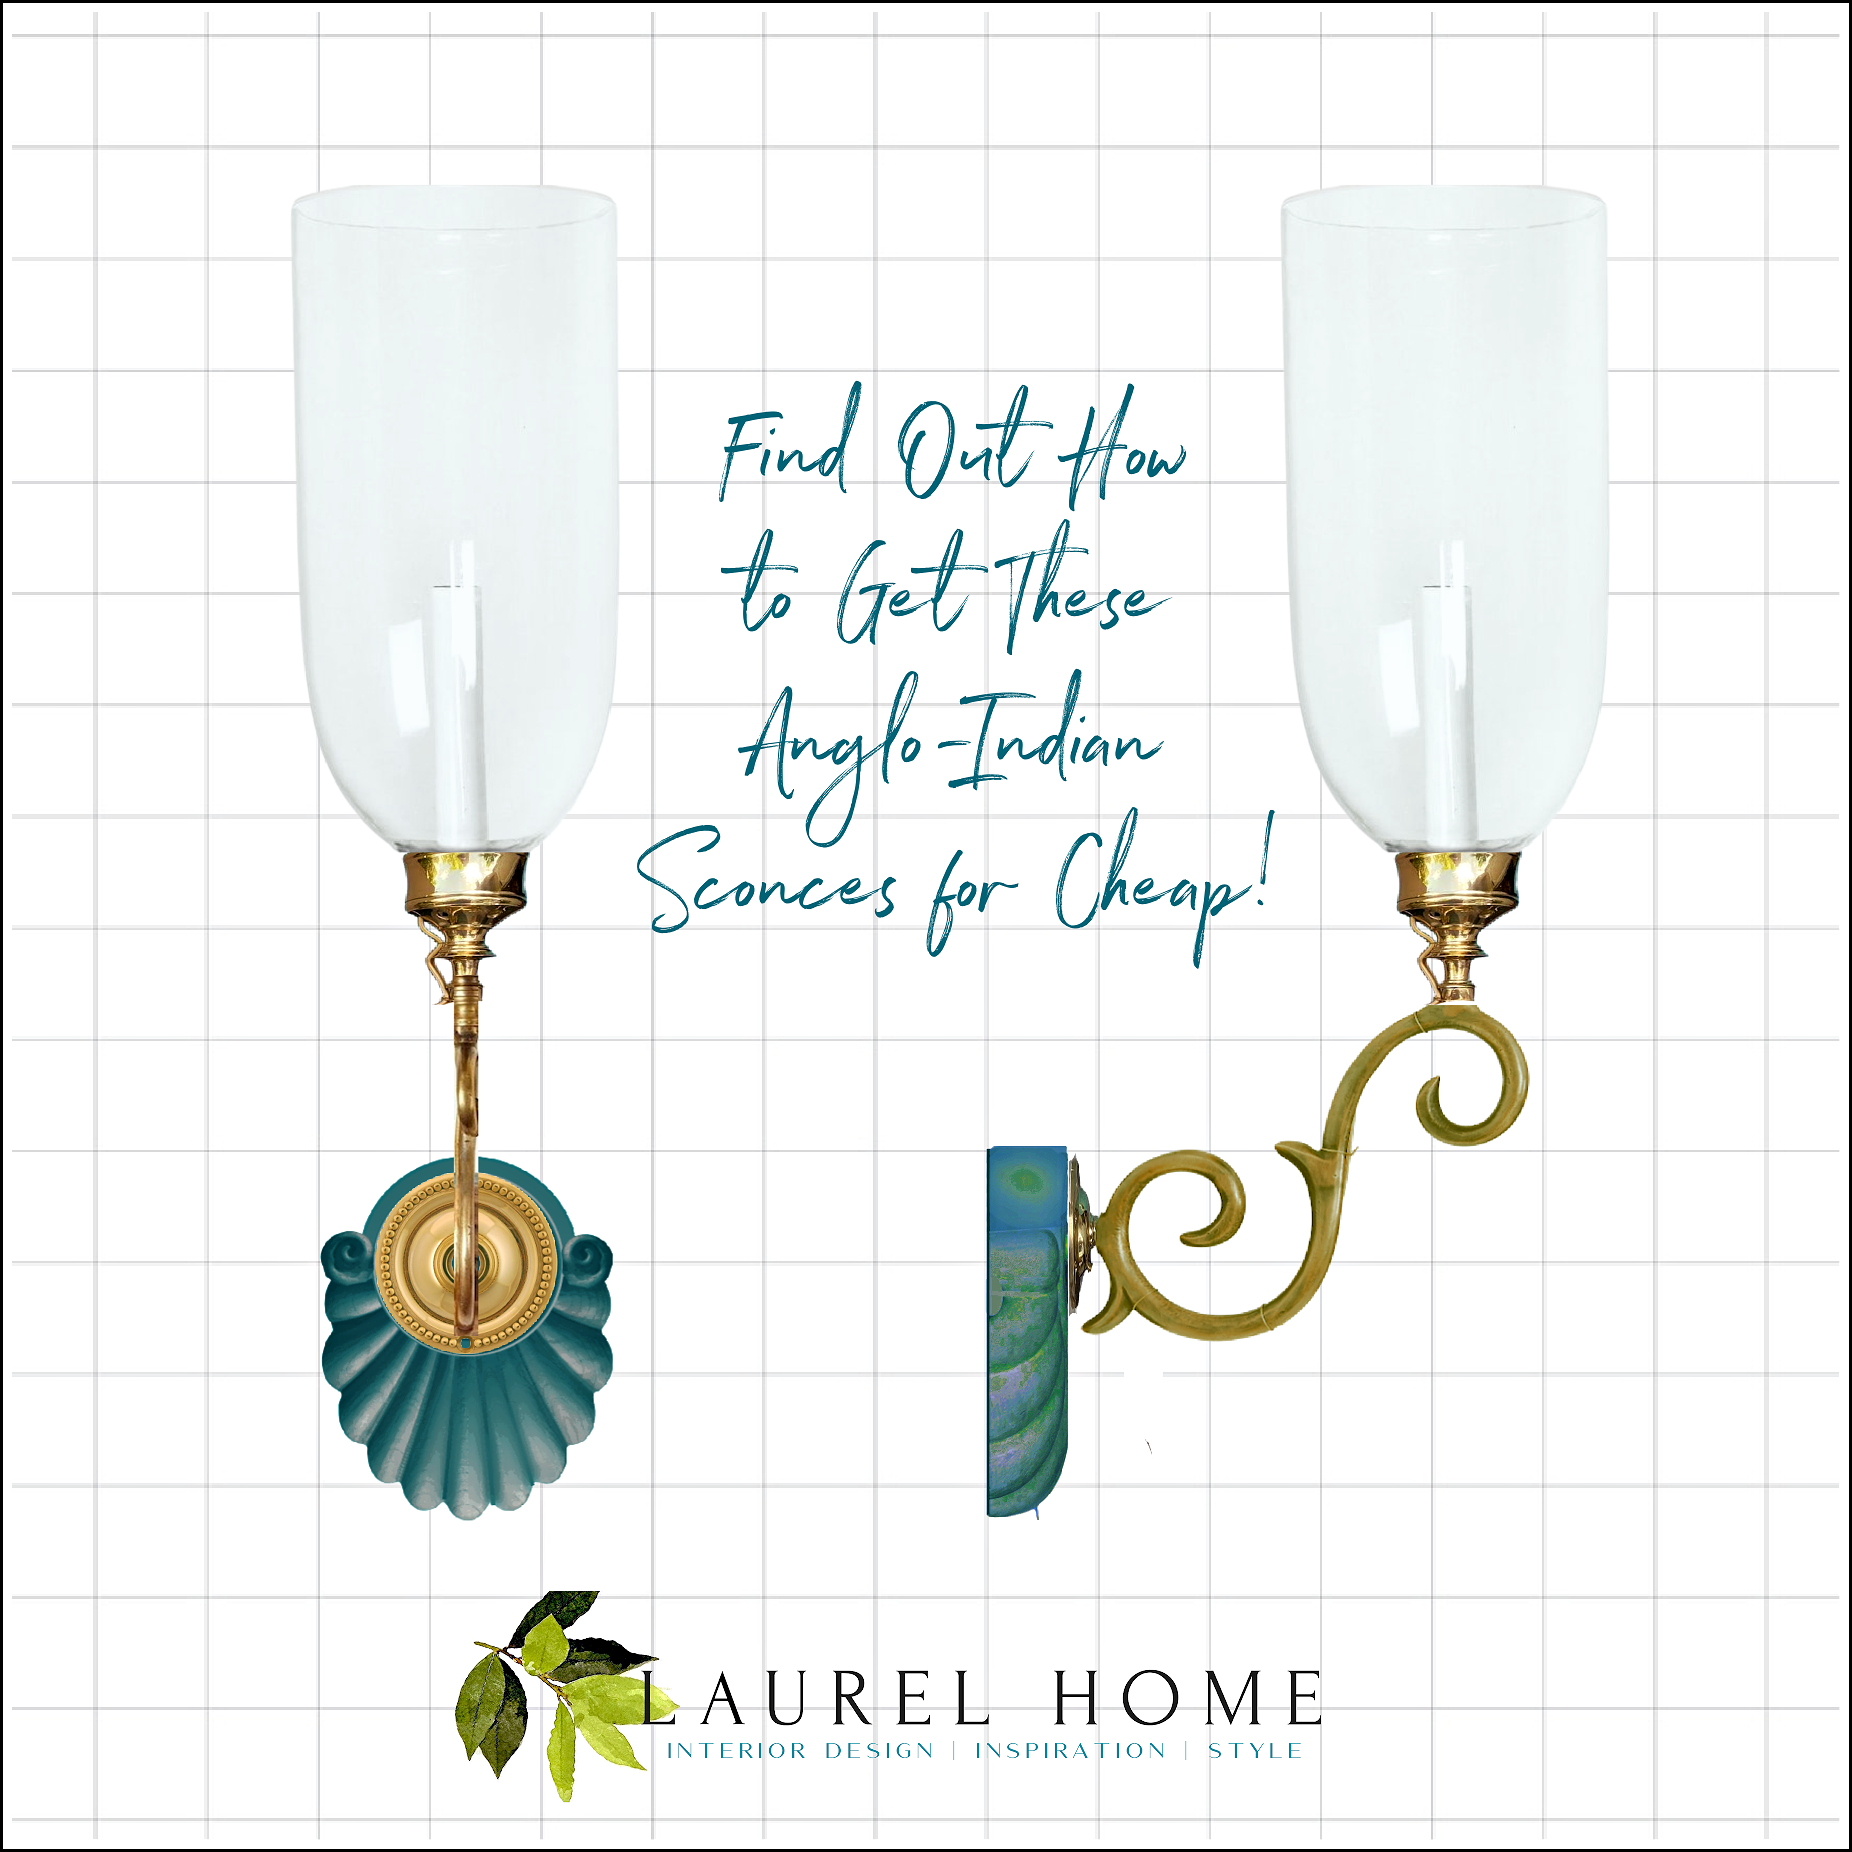 Anglo-Indian Sconces for cheap teal shells - I found an inexpensive way to make this gorgeous high-end lighting